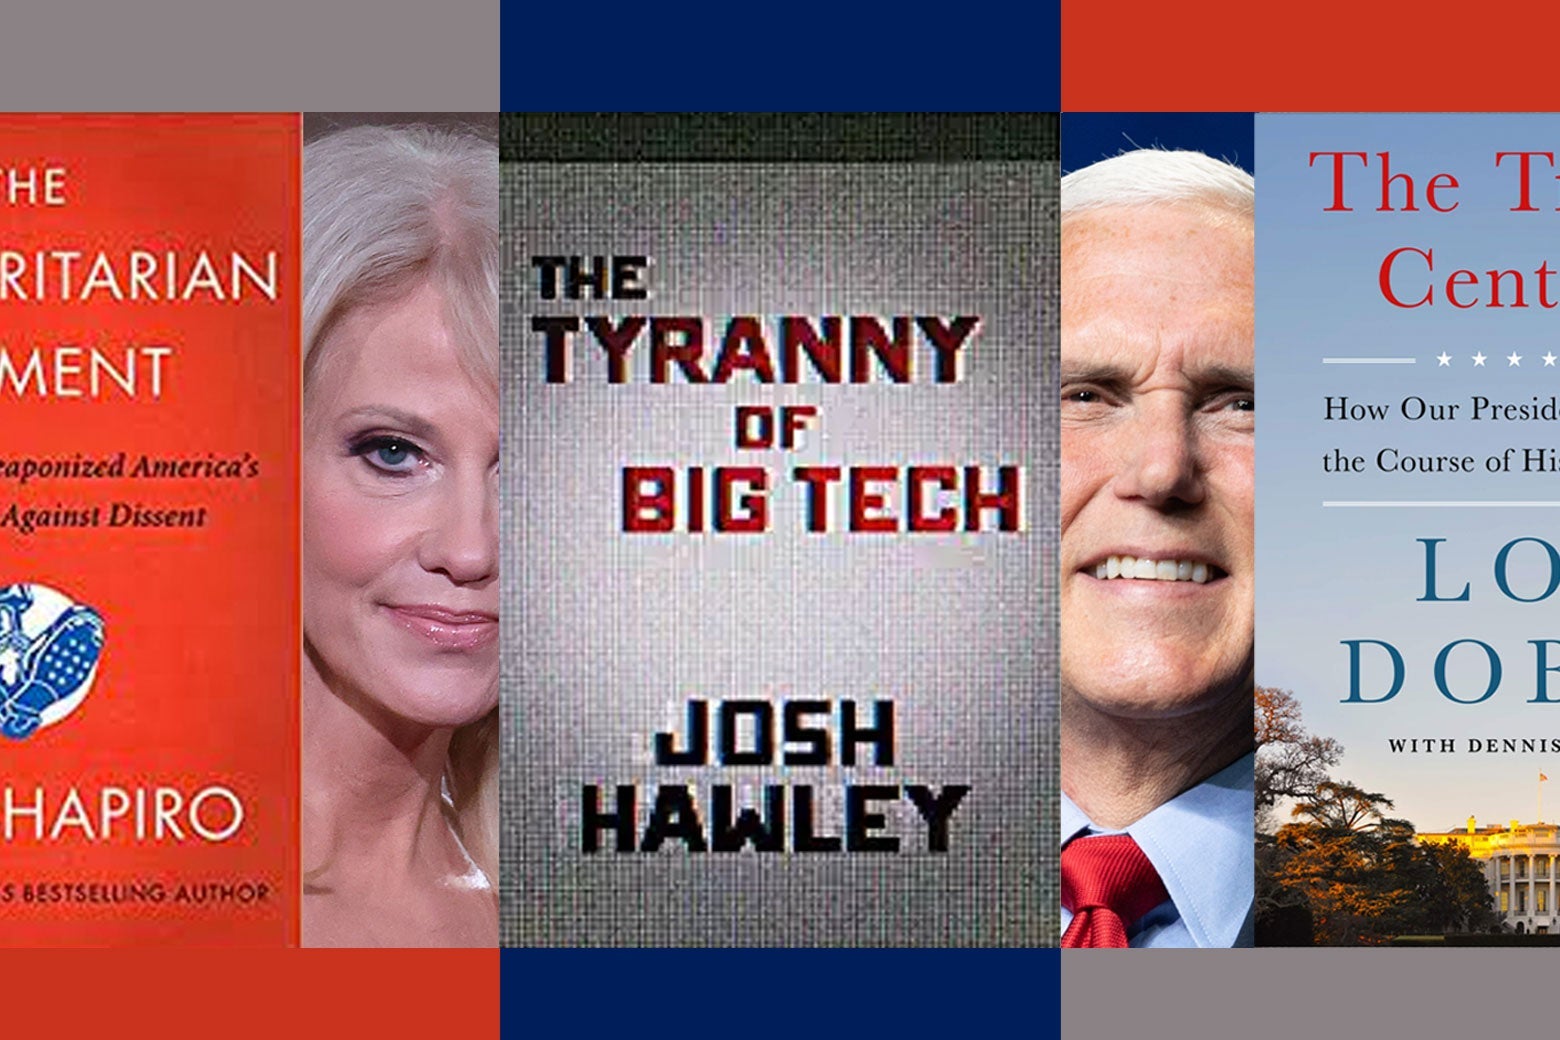 Collage with photos of Kellyanne Conway and Mike Pence interspersed with the covers of books by Ben Shapiro, Lou Dobbs, and Josh Hawley